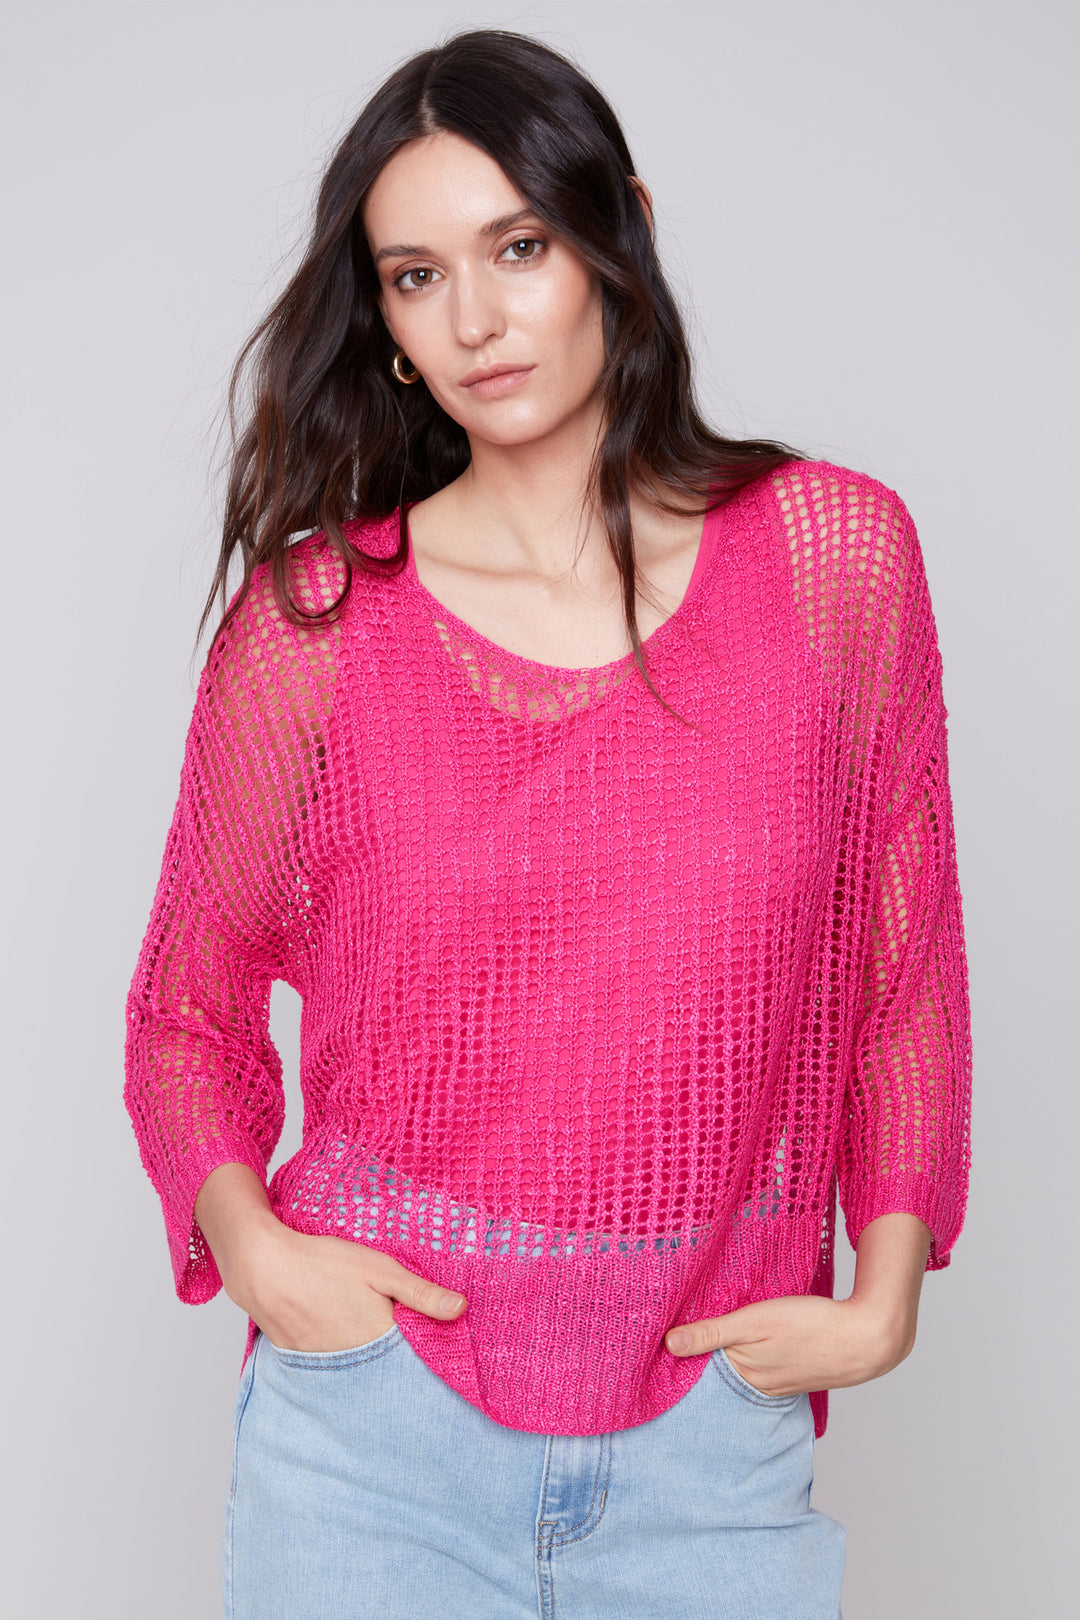 Show off your curves with the loose V-neck and captivating fishnet crochet pattern! 